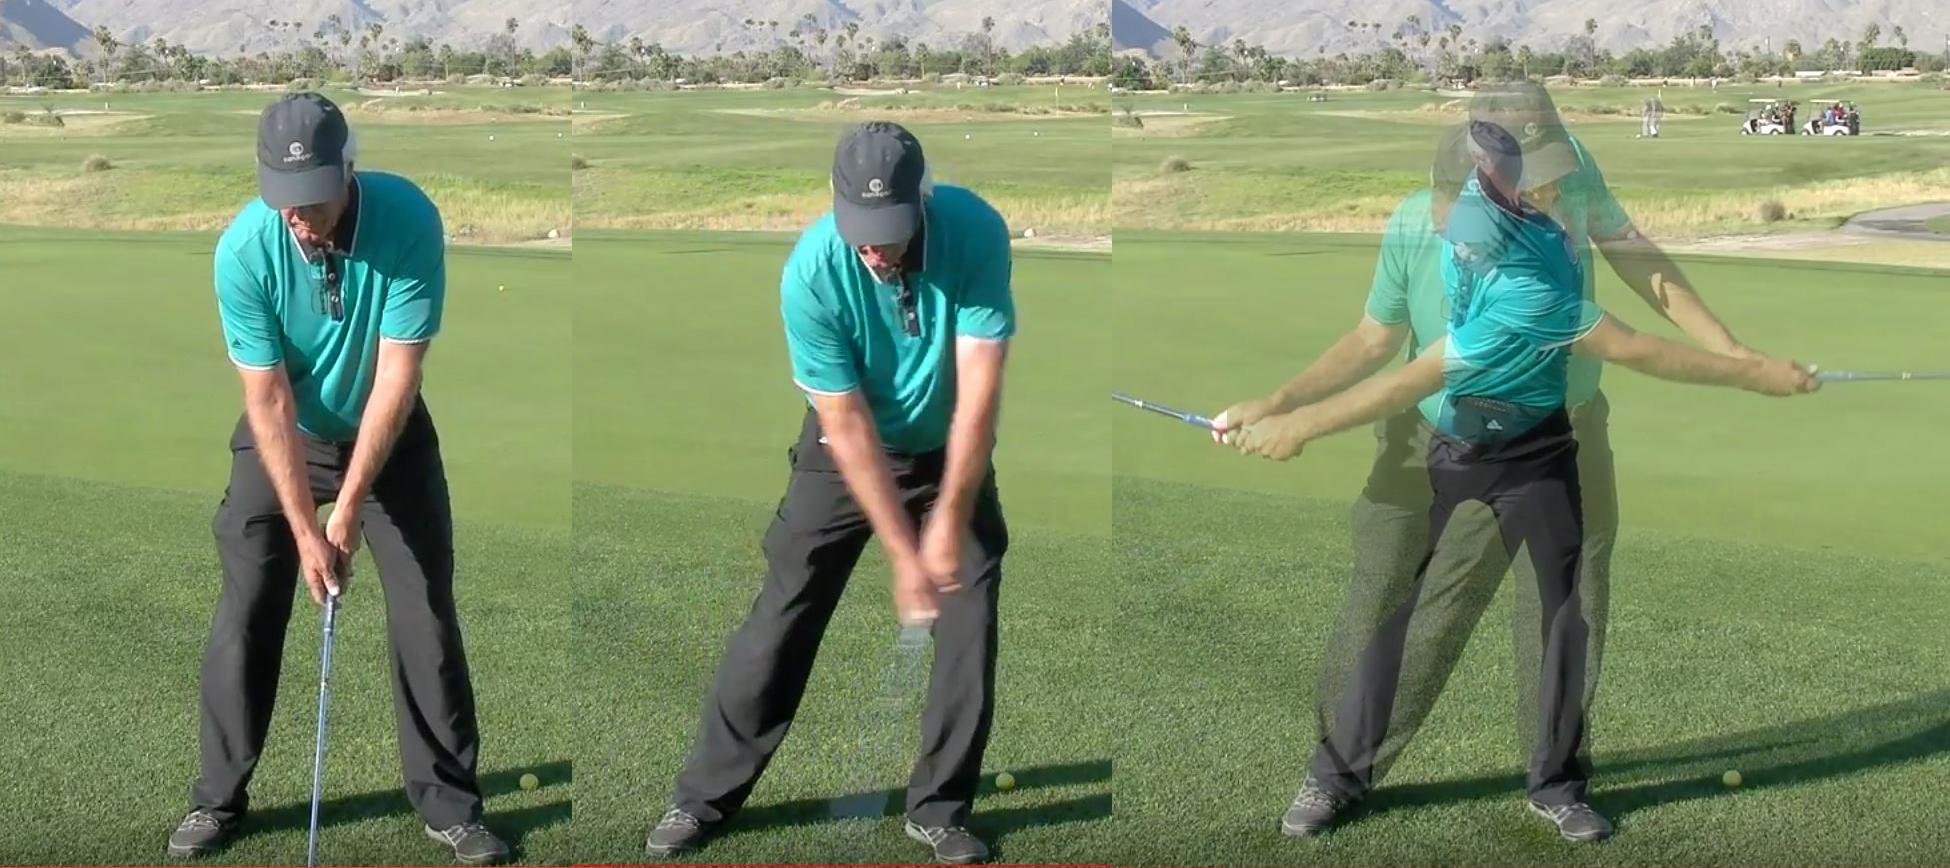 1-2-3    1-Neutral Position 2-Over  3-Swing     Works like a charm.